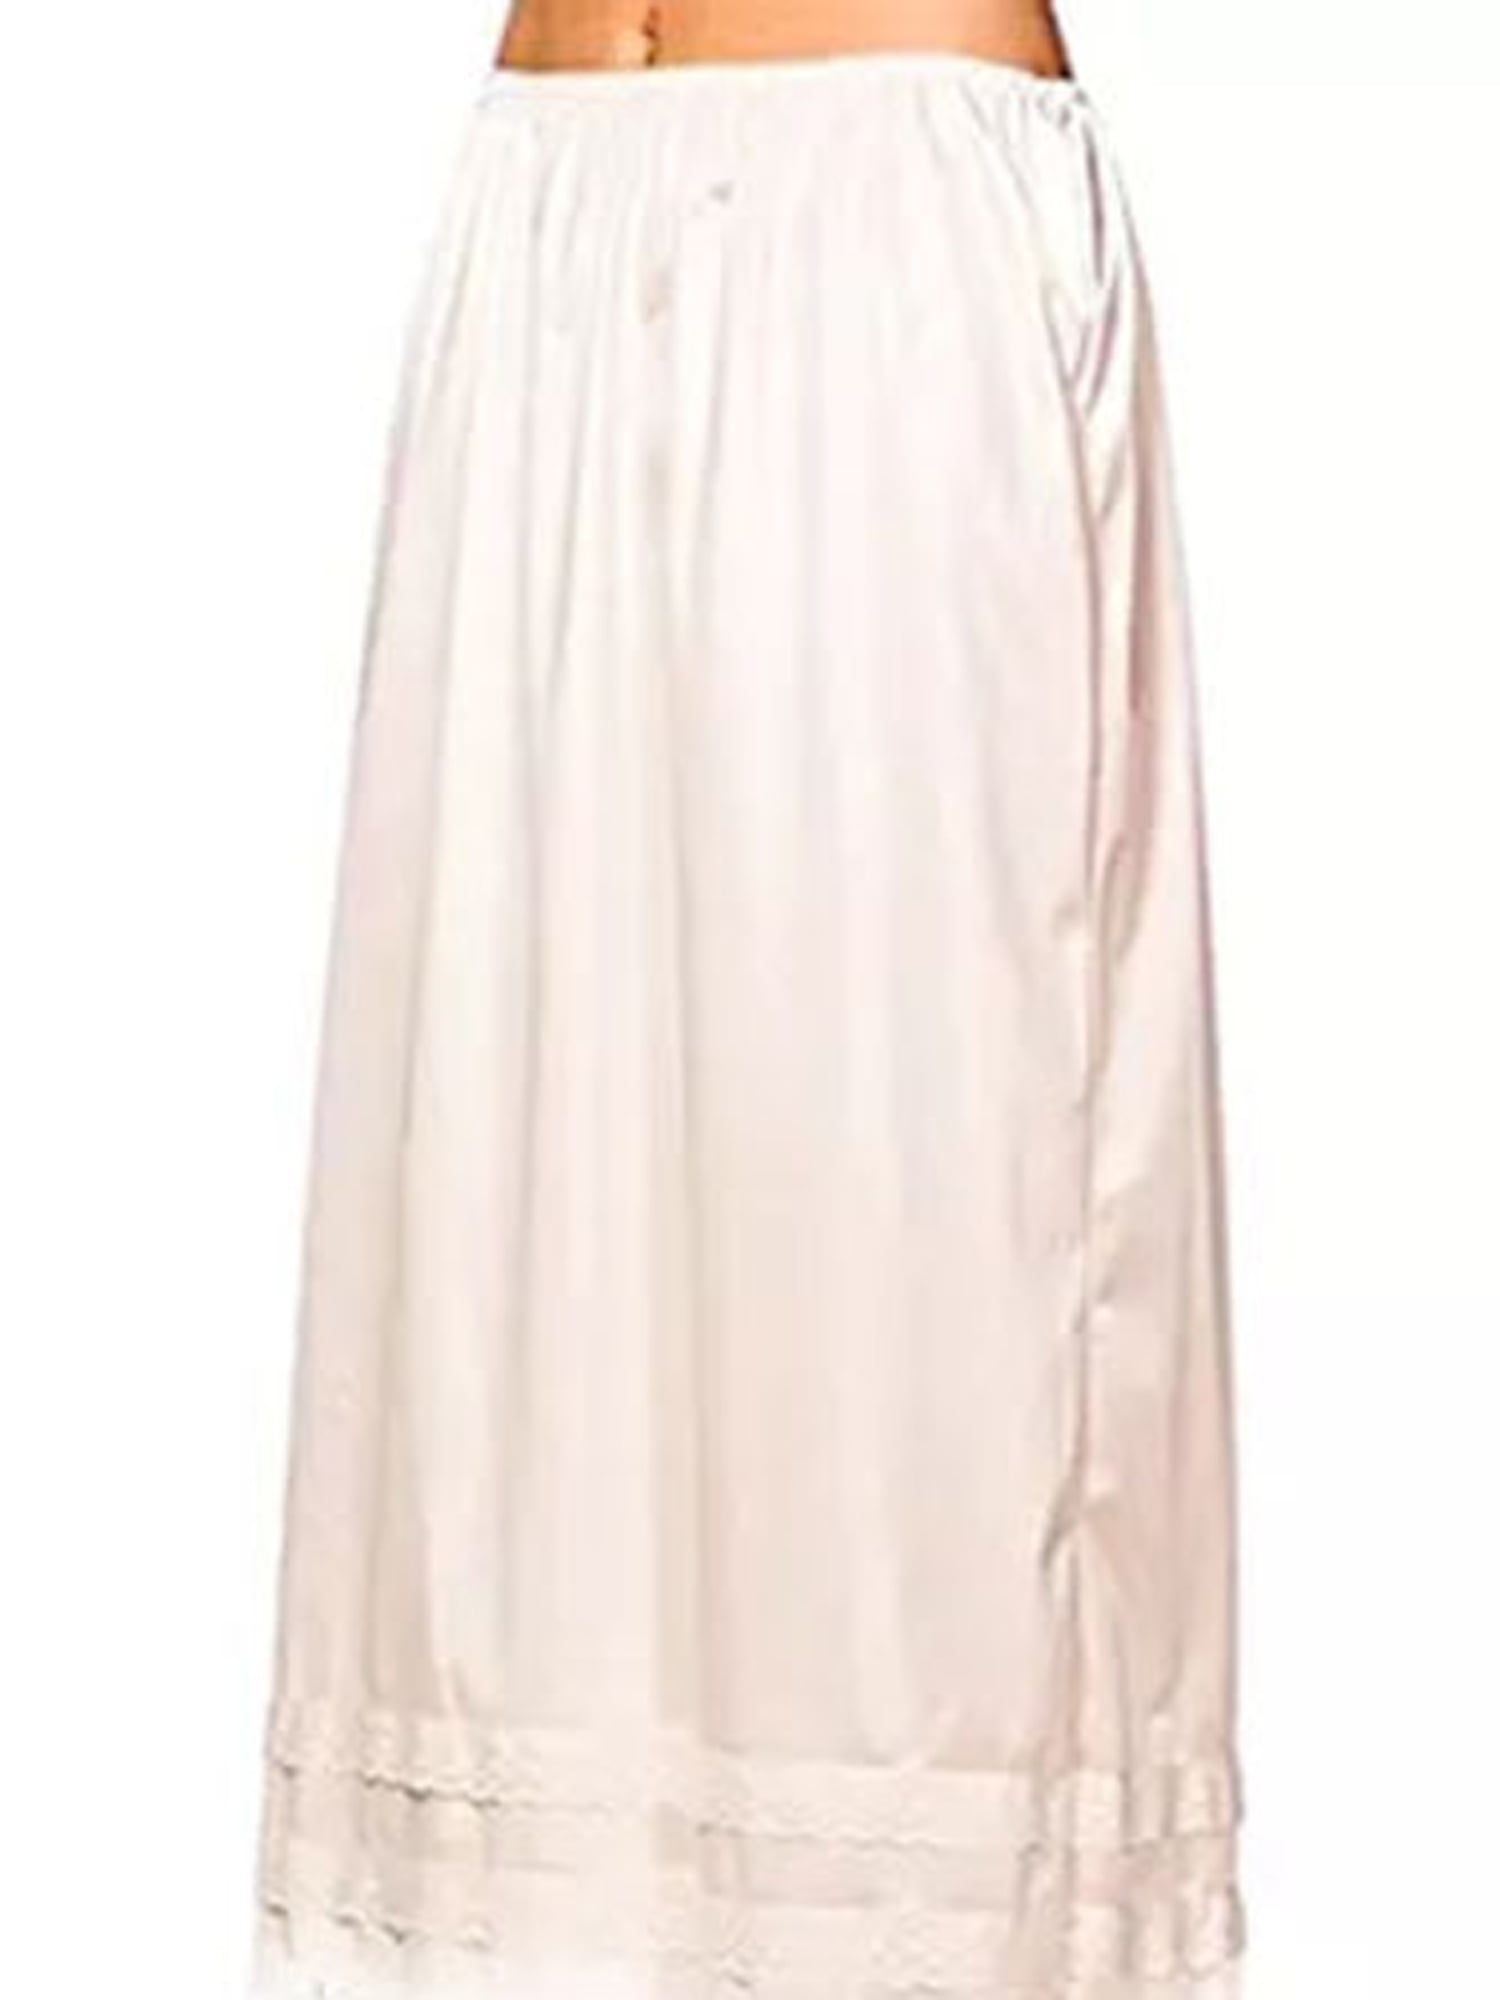 Plus size White Half Slip Petticoat lengths from 23"-40" size 16-18 